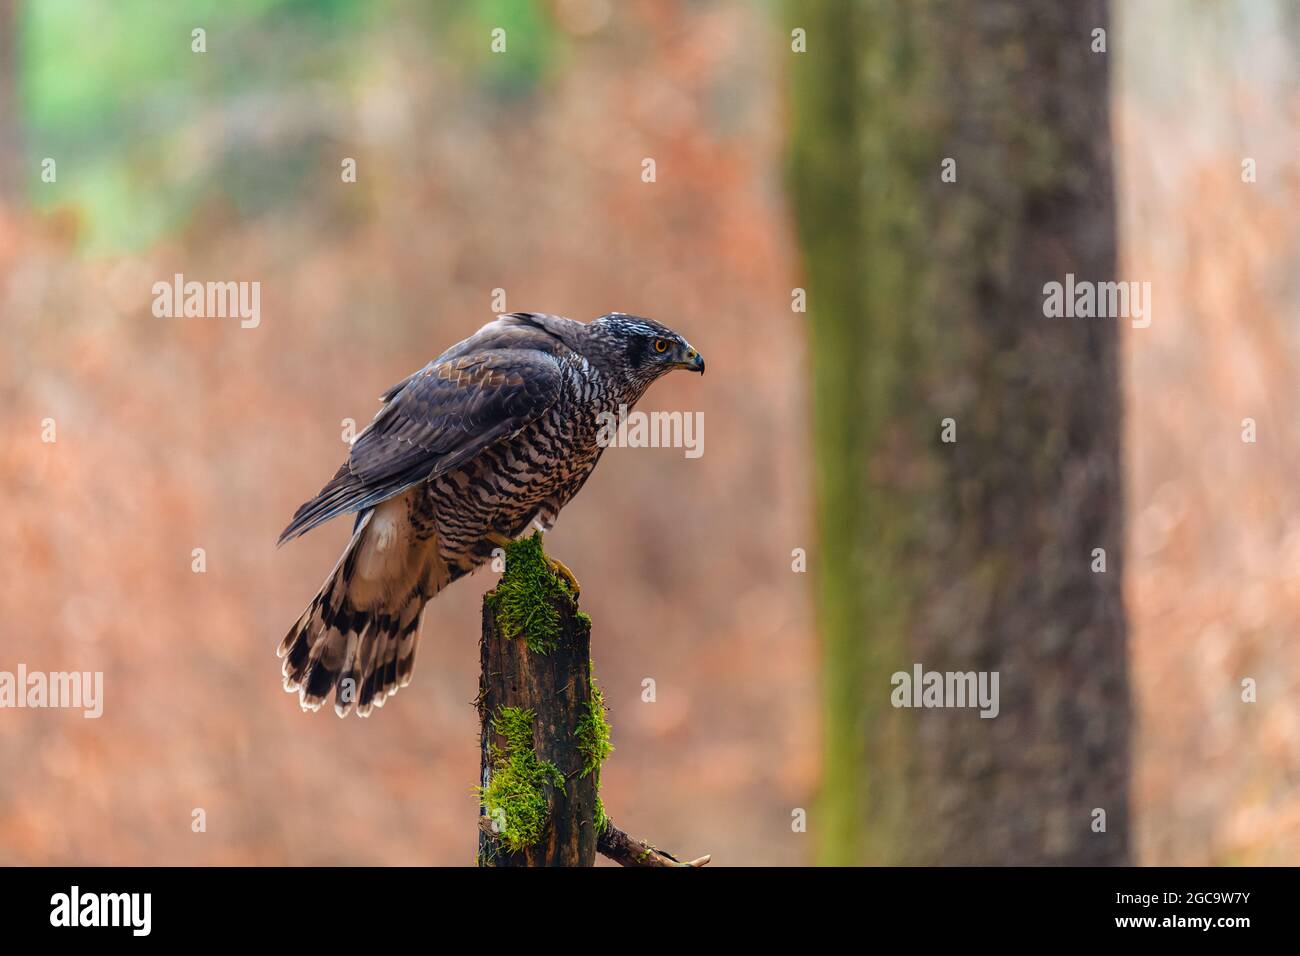 The northern goshawk (Accipiter gentilis) sitting on a stick. Autumn forest, colorful background, warm early evening colors. Stock Photo